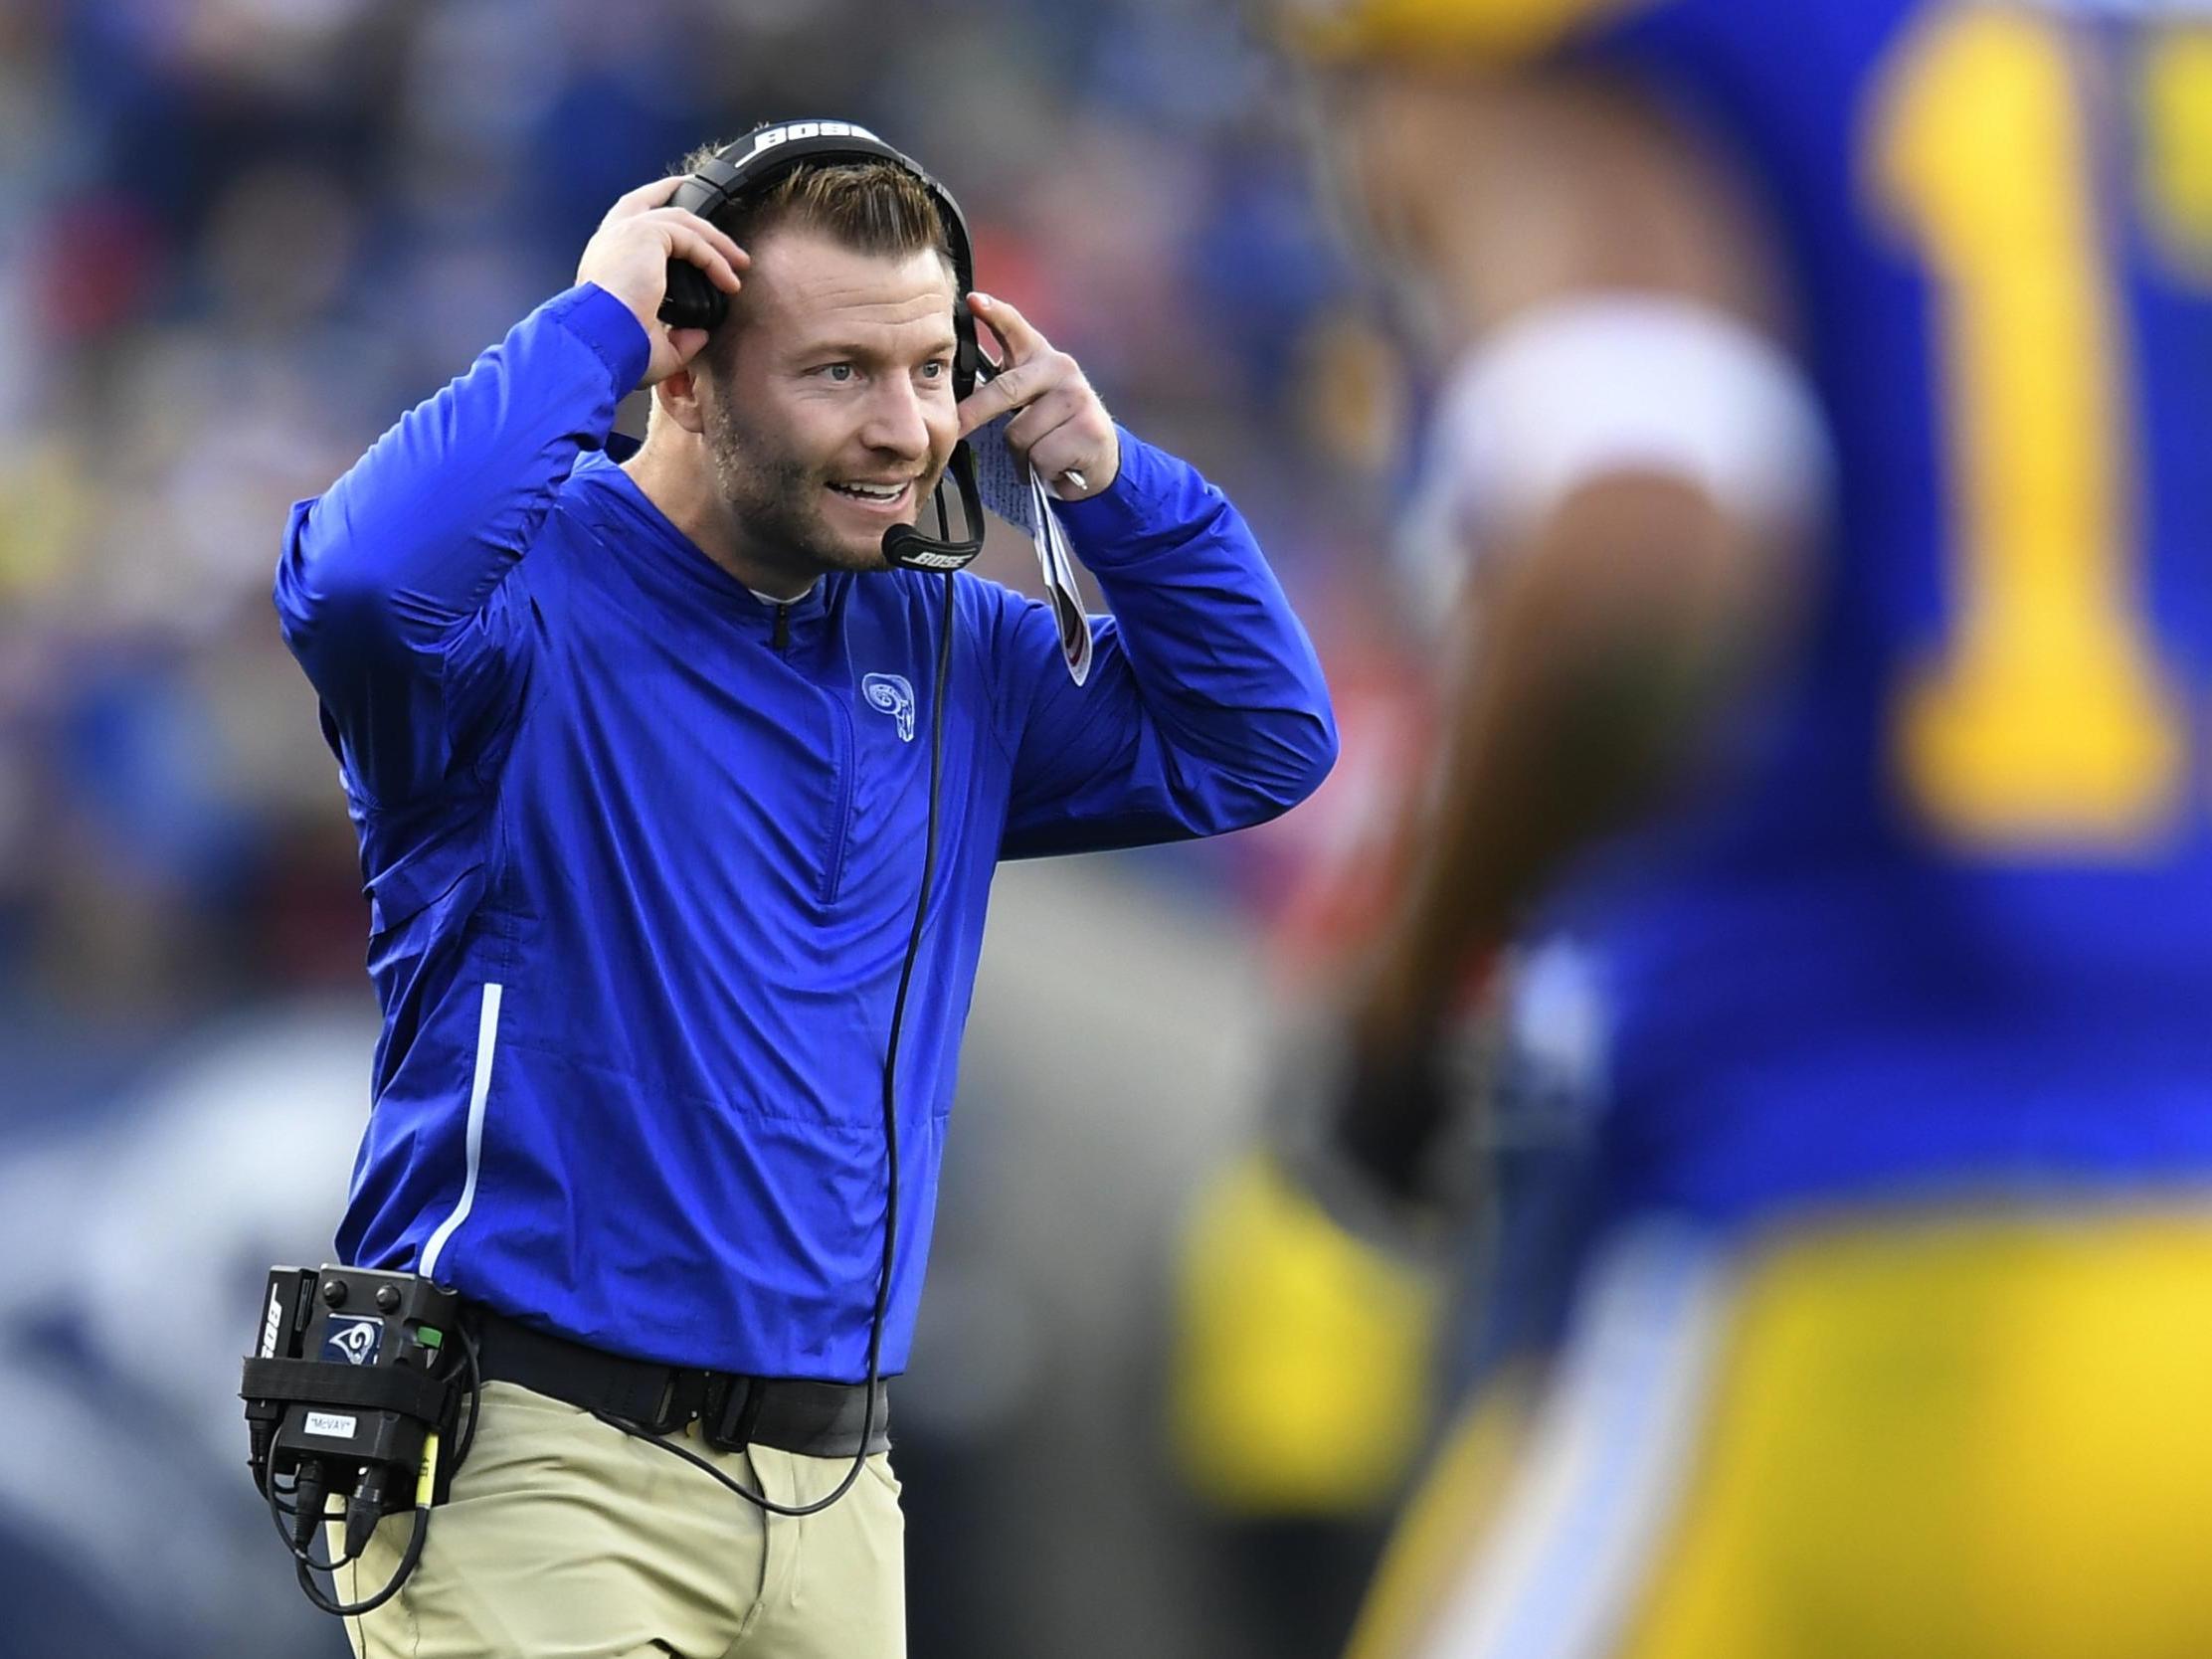 Sean McVay's Rams are one of the league's most explosive offences